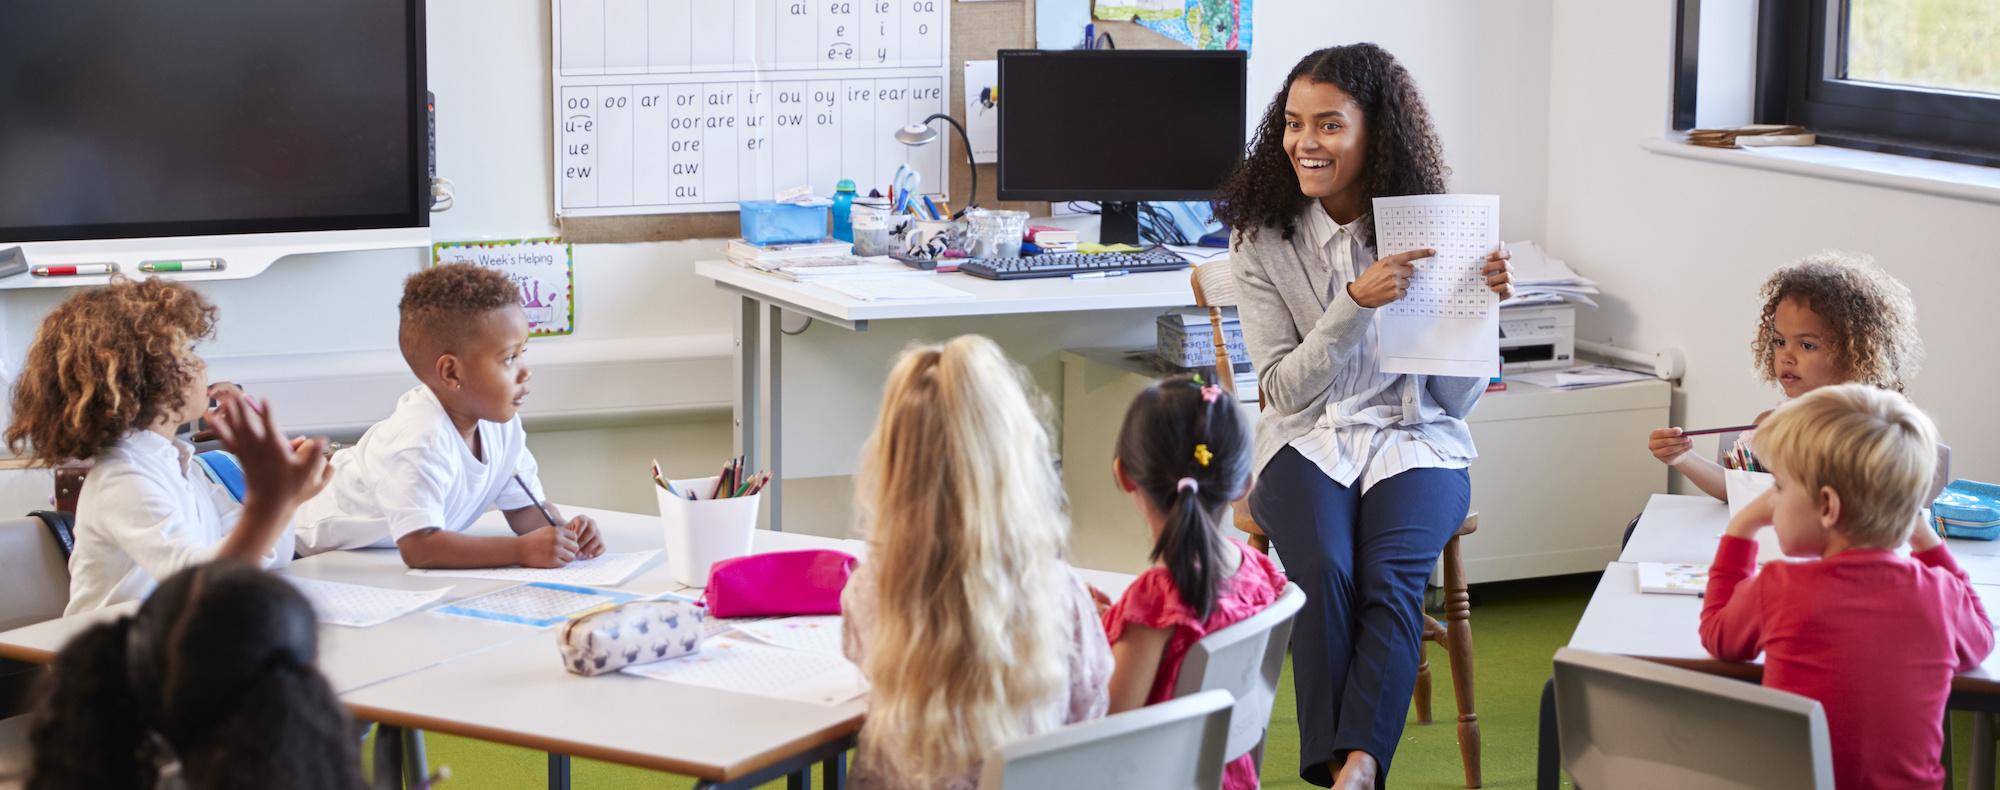 A teacheer sits in a chair in front of a classroom of kindergarteners. She is smiling and pointing to a chart in her hand.